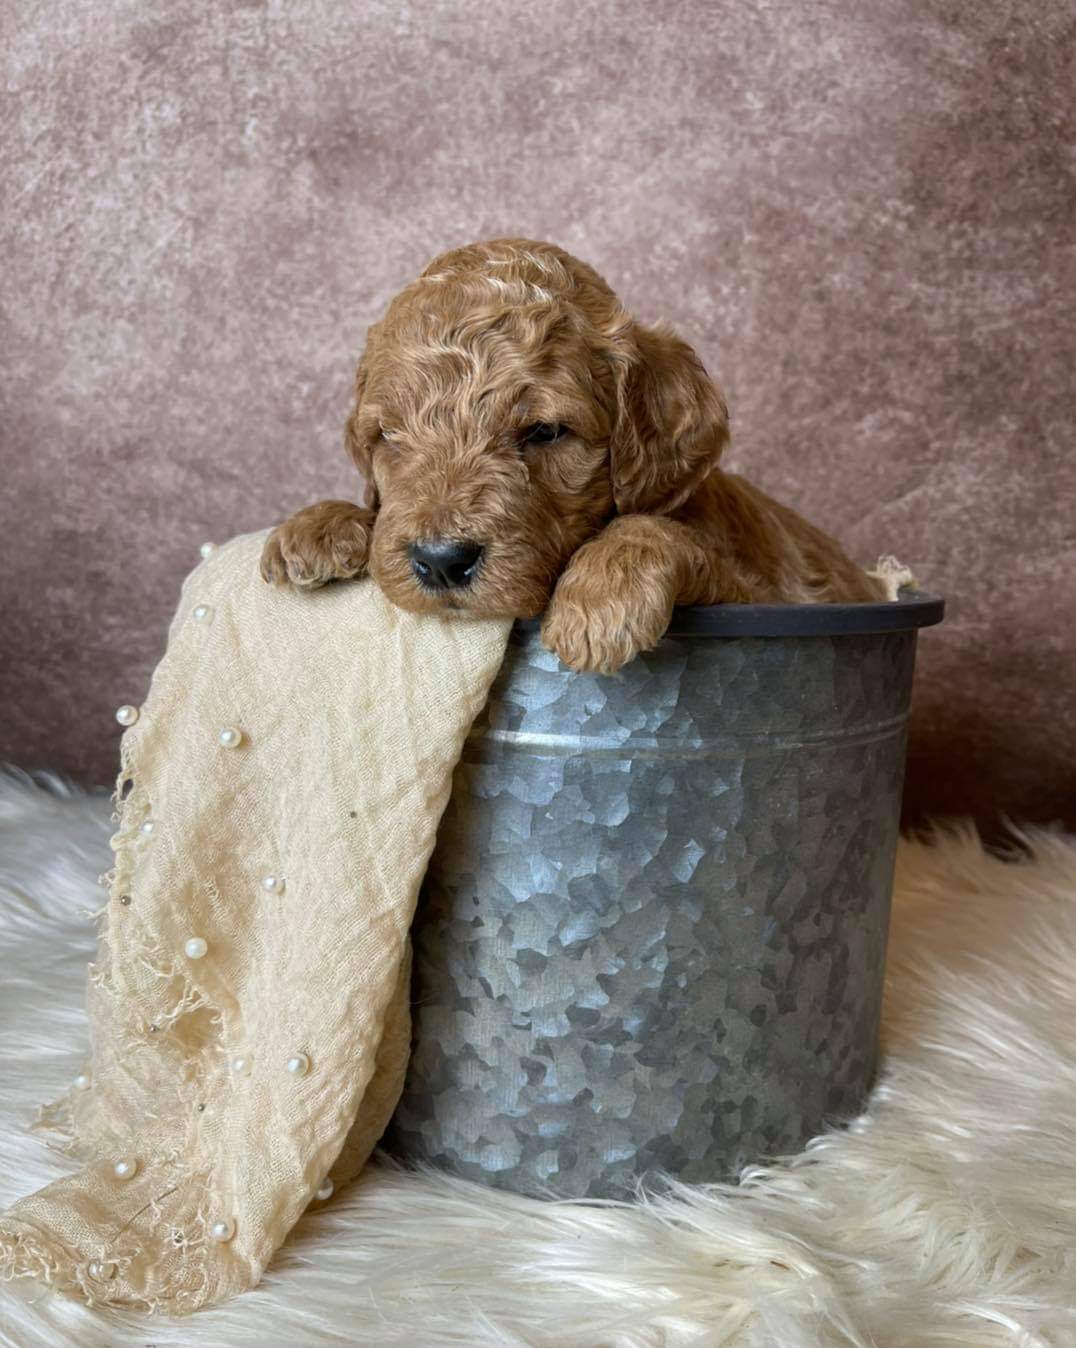 Goldendoodle from Darlin' Doggies in Charlotte, NC